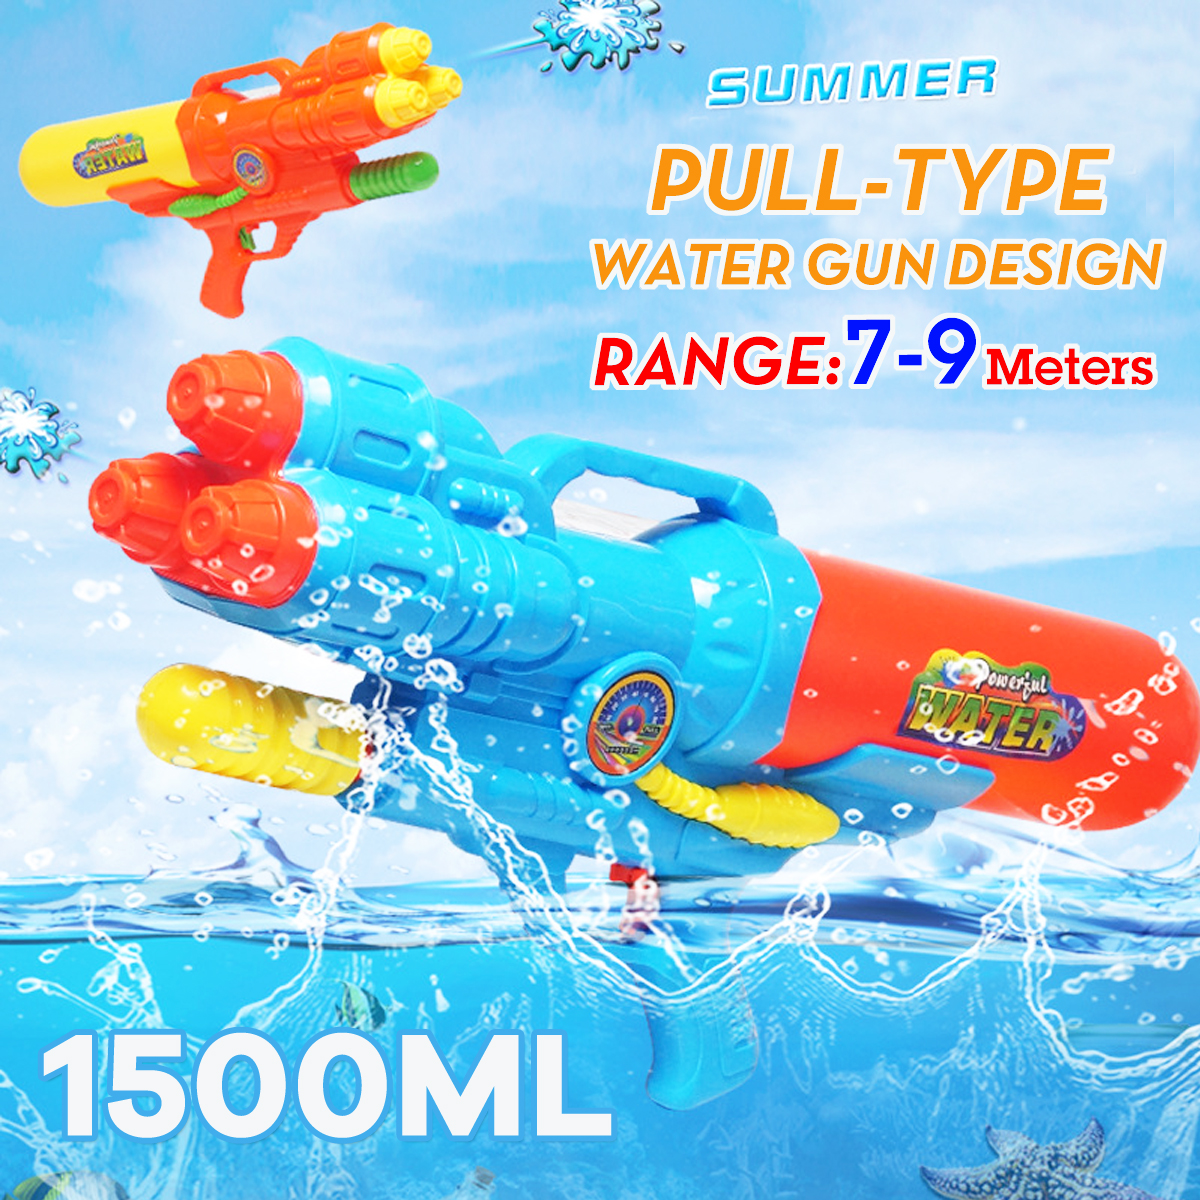 1500ml-Red-Or-Blue-Toy-Water-Sprinkler-With-A-Range-Of-7-9m-Plastic-Water-Sprinkler-For-Children-Bea-1703042-1